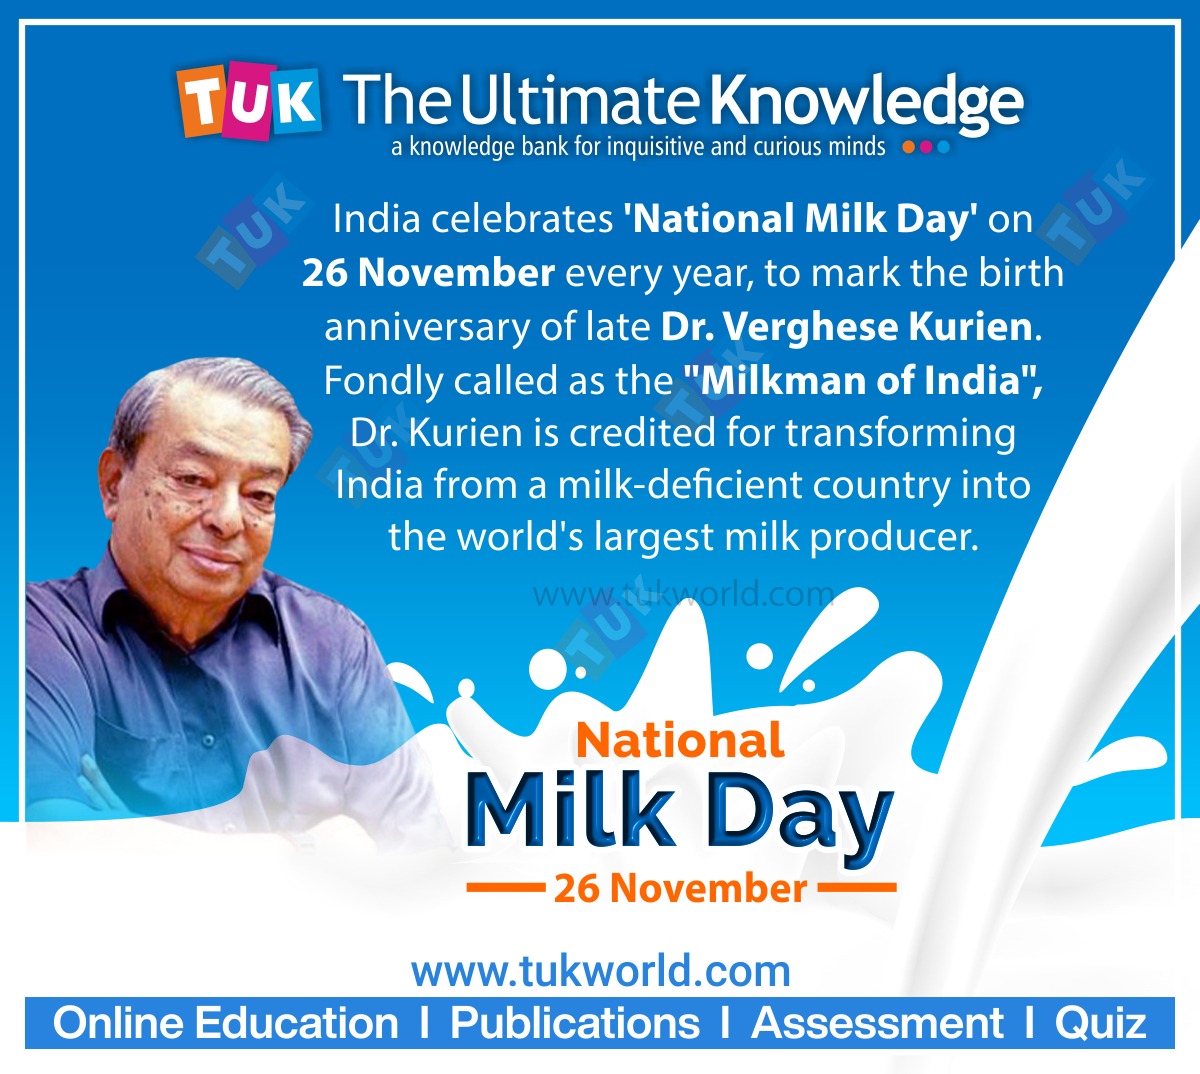 TUK TheUltimate Knowledge

a knowledge bank for inquisitive and curious minds

India celebrates 'National Milk Day' on
26 November every year, to mark the birth
anniversary of late Dr. Verghese Kurien.
Fondly called as the "Milkman of India",

2 Dr. Kurien is credited for transforming
India from a milk-deficient country into
the world's largest milk producer.

u National

Milk Day

— 26 November ==

www.tukworld.com
Online Education | Publications | Assessment | Quiz